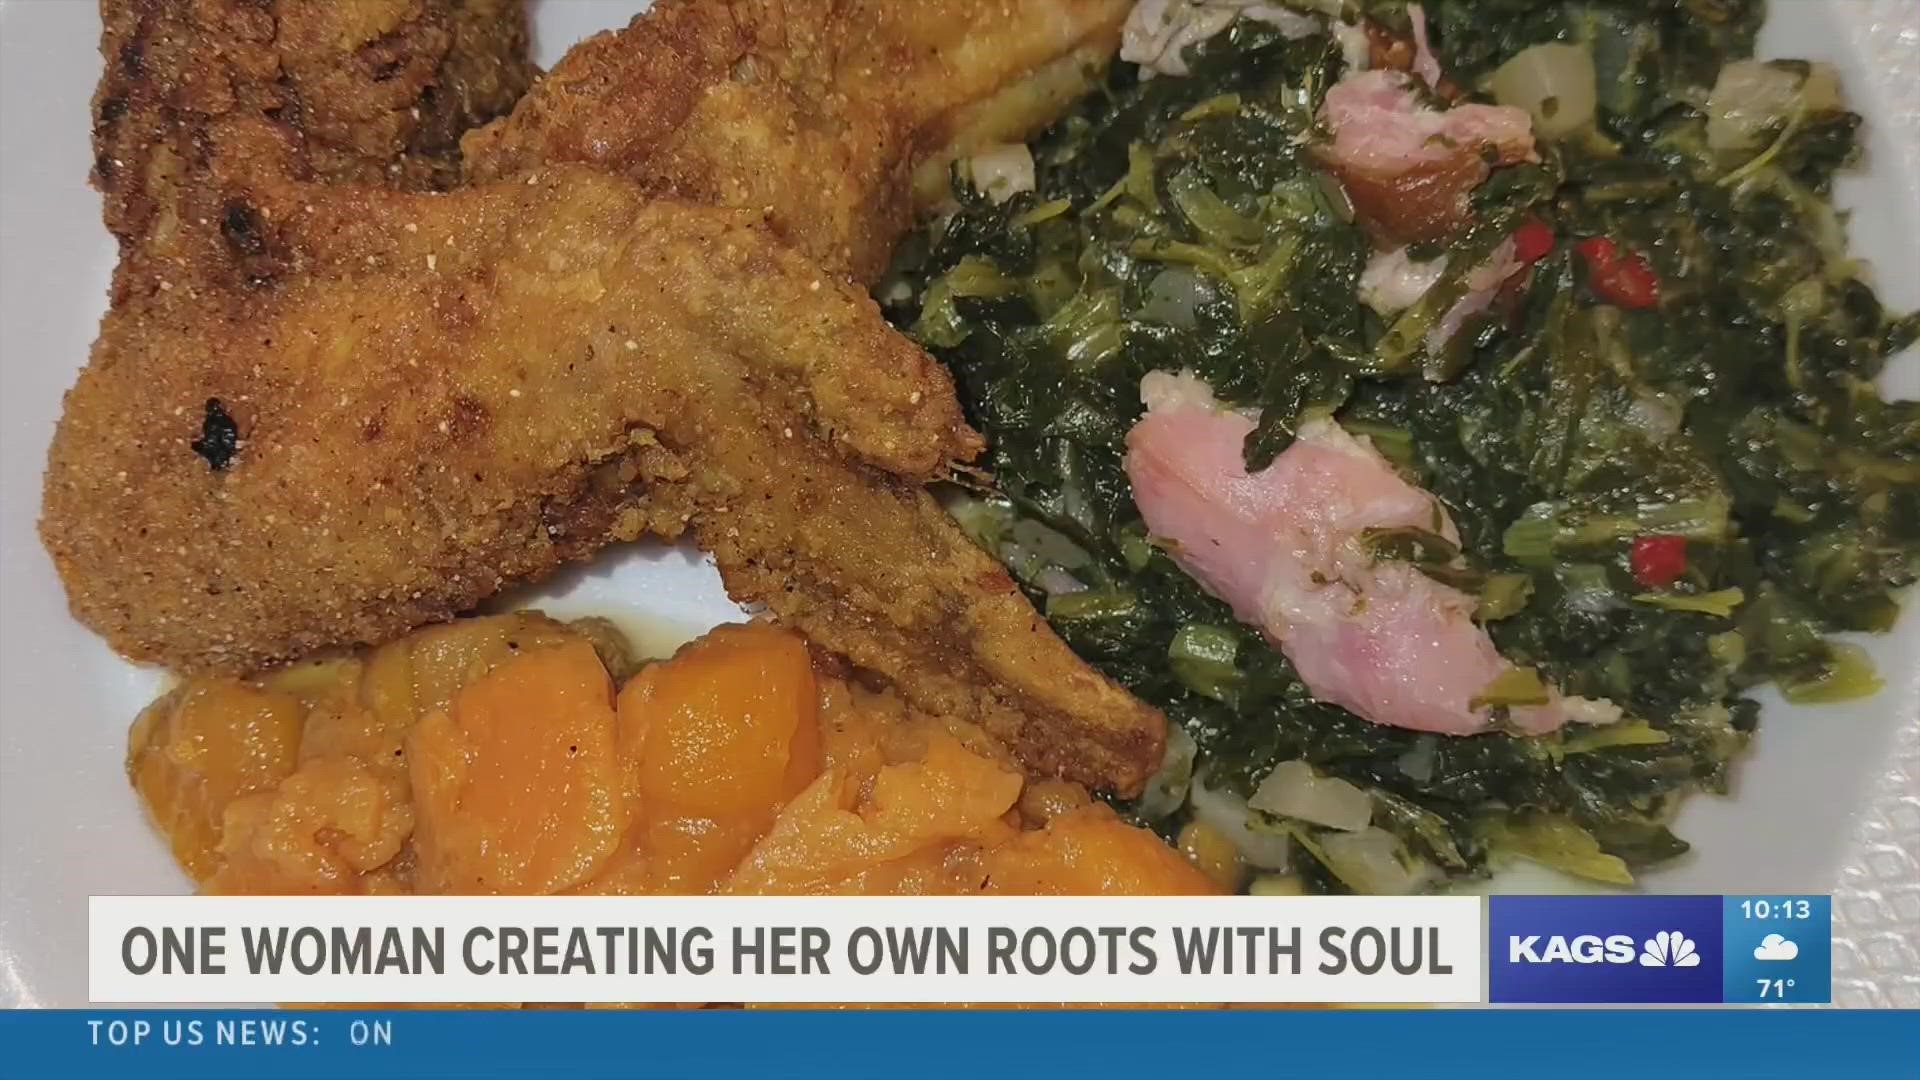 The history of soul food dates back to when slavery when African Americans survived off scraps. One Black business owner is infusing that history to create her own.